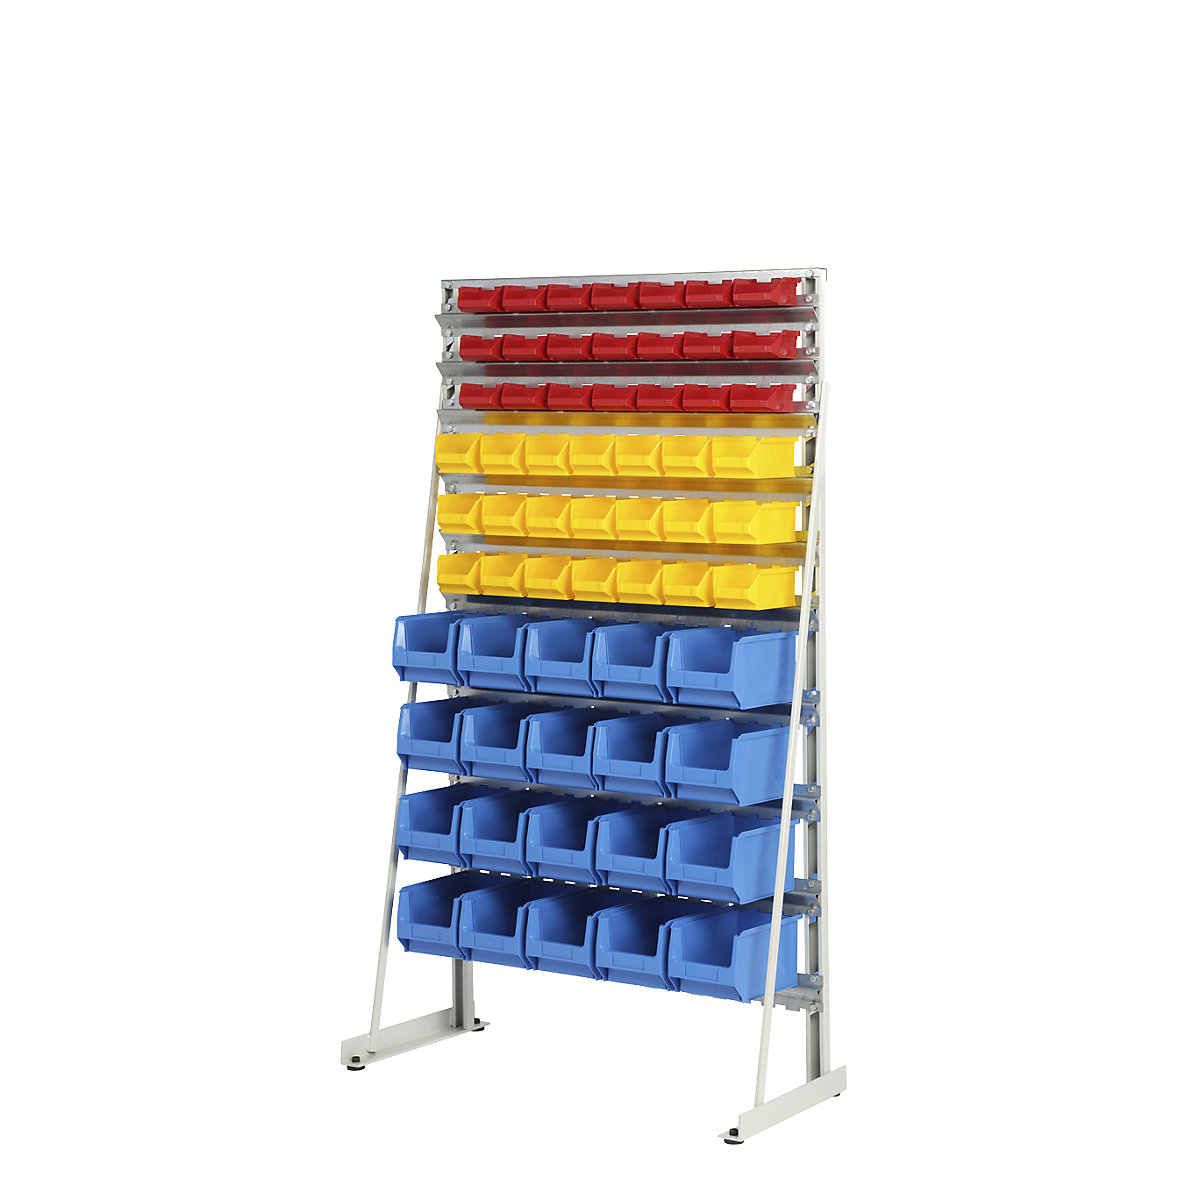 https://images.kkeu.de/is/image/BEG/Shelving_Storage/Shelving_units_for_boxes_bin_shelving_units/Free-standing_small_parts_shelf_unit_with_open_fronted_storage_bins_pdplarge-mrd--000024979093_PRD_org_all.jpg